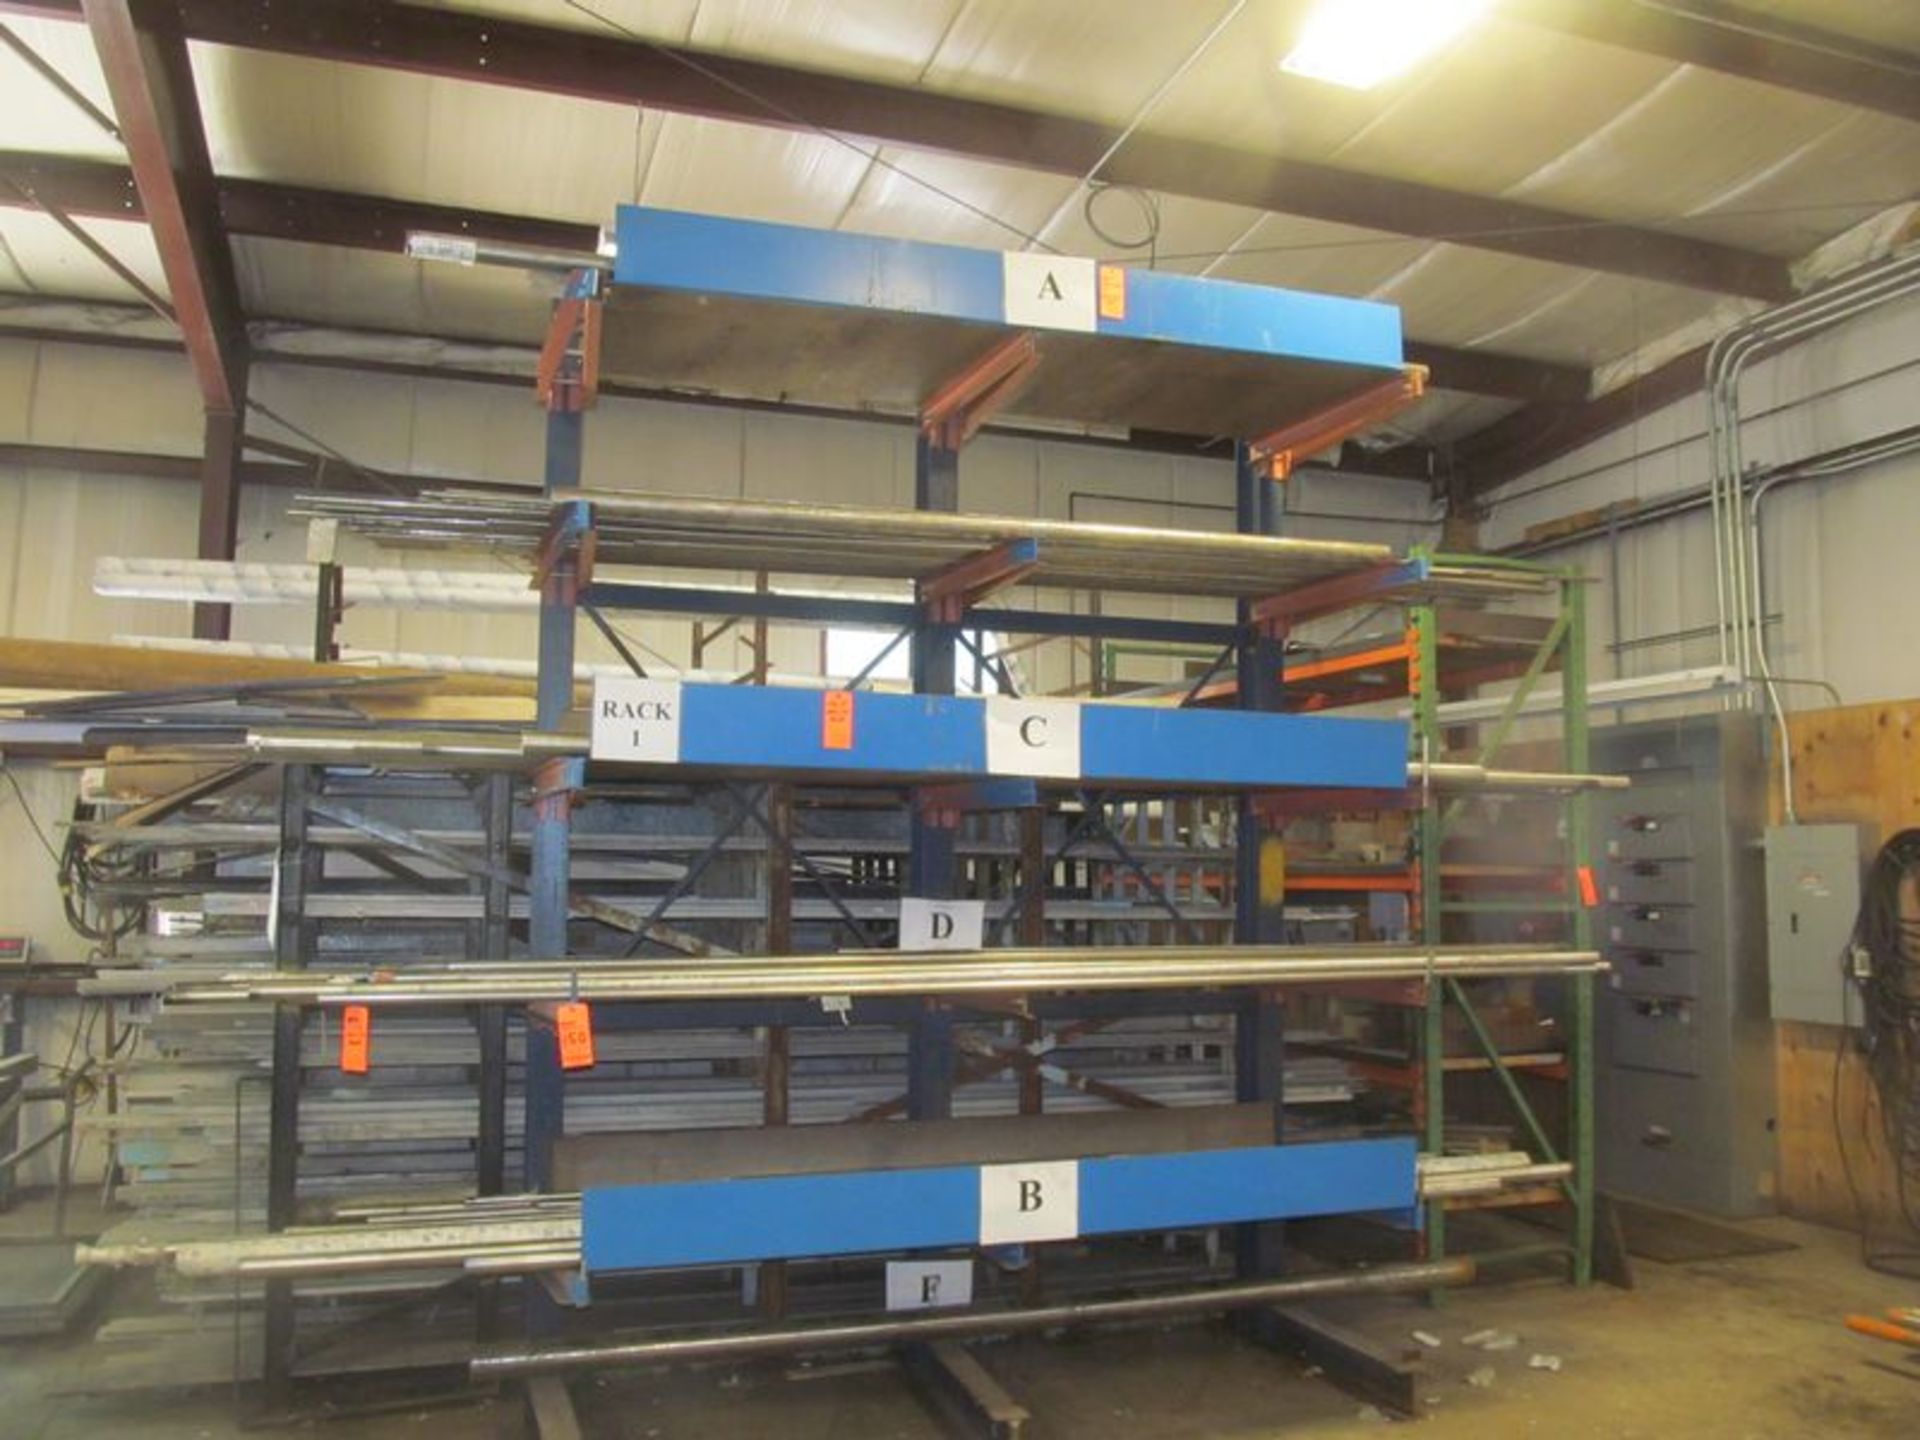 6 tier cantilevered metal stock rack, 102"w x 28" deep x 12' high with (15) 32" adjustable arms